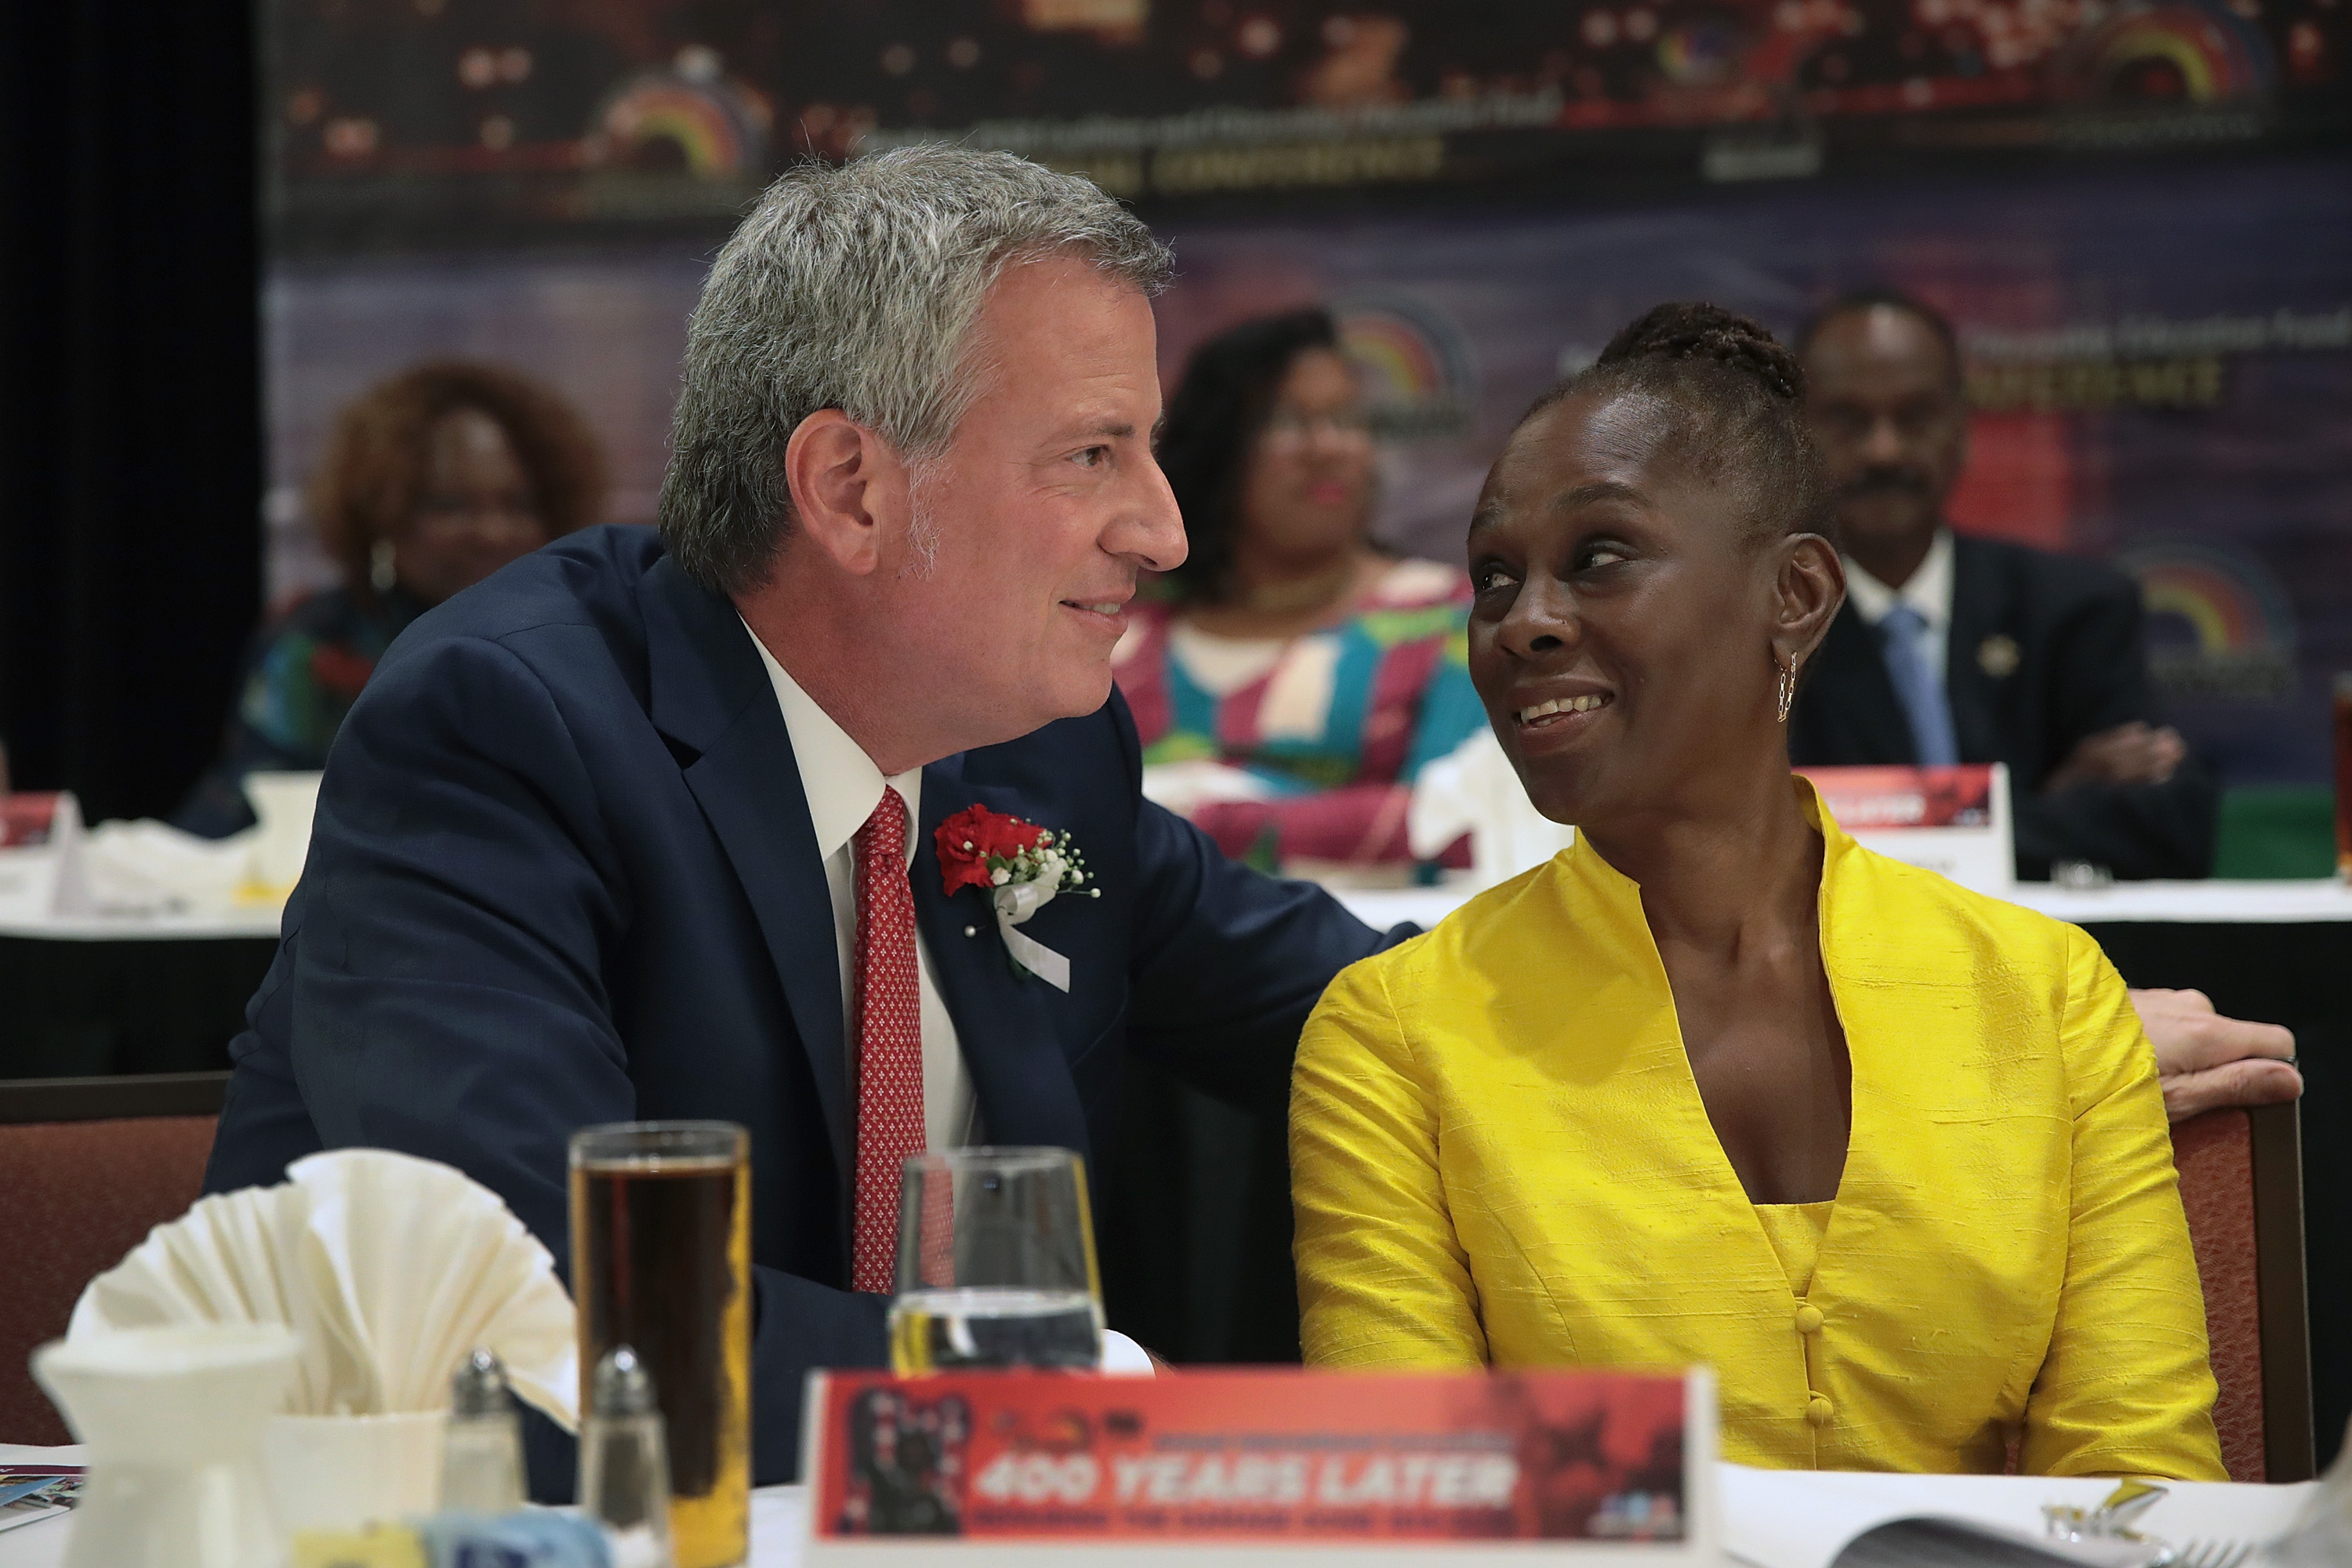 Democratic presidential candidate and New York City mayor Bill De Blasio speaks to his wife Chirlane McCray at the Rainbow PUSH Coalition Annual International Convention on July 1, 2019 in Chicago, Illinois. (Scott Olson/Getty Images)